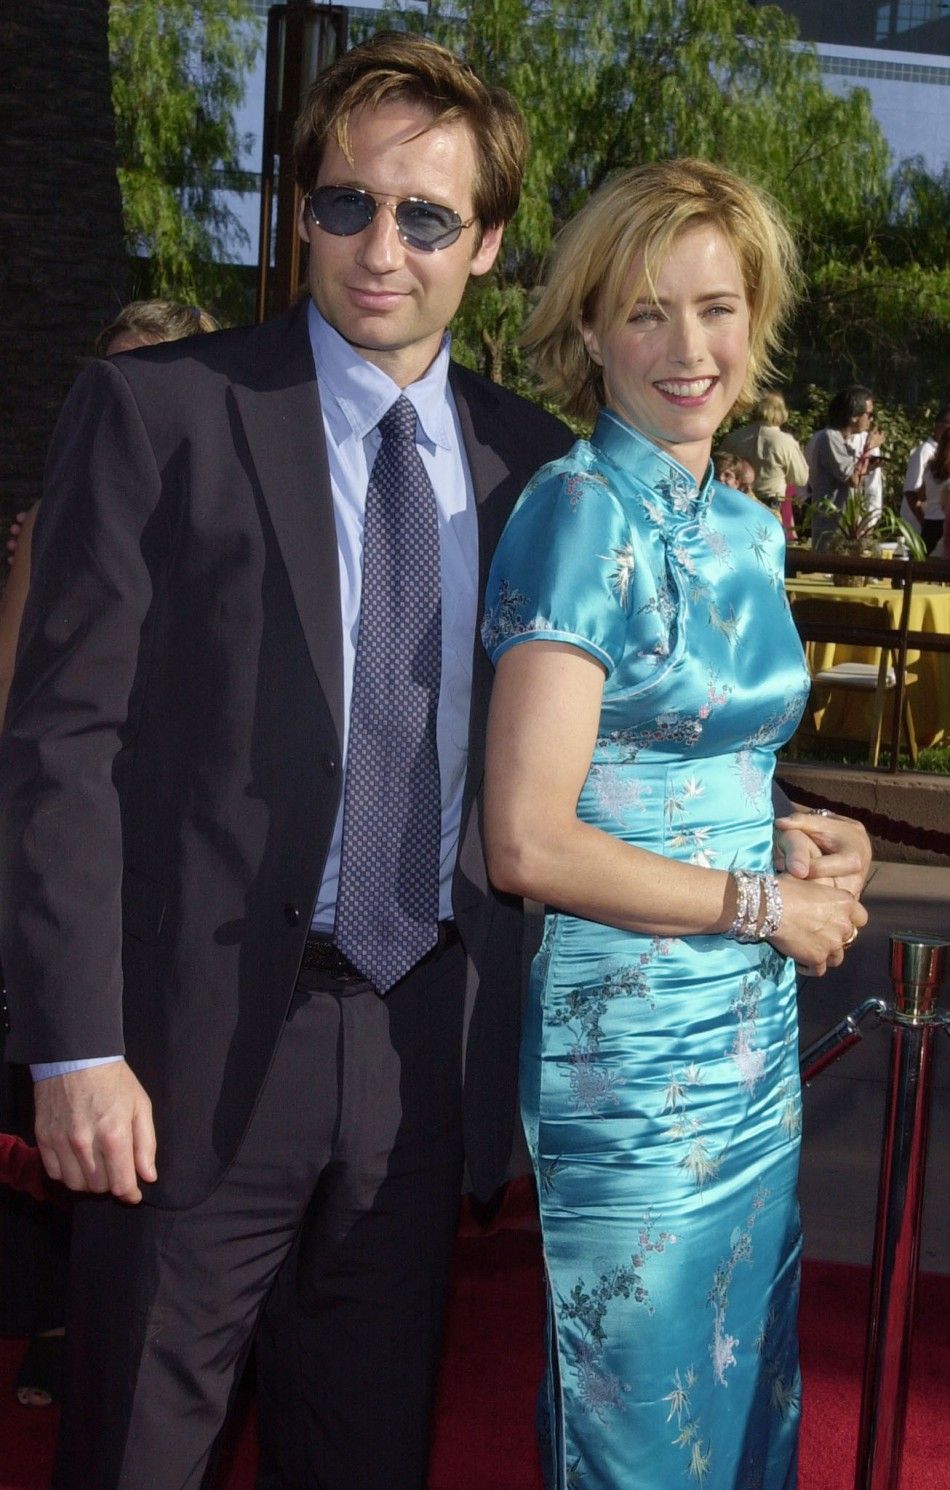 Actress Tea Leoni, who stars in the action adventure motion picture quotJurassic Park III,quot arrives July 16, 2001 with her husband, actor David Duchovny, at the Los Angeles premiere of the film at the Universal Amphitheatre.